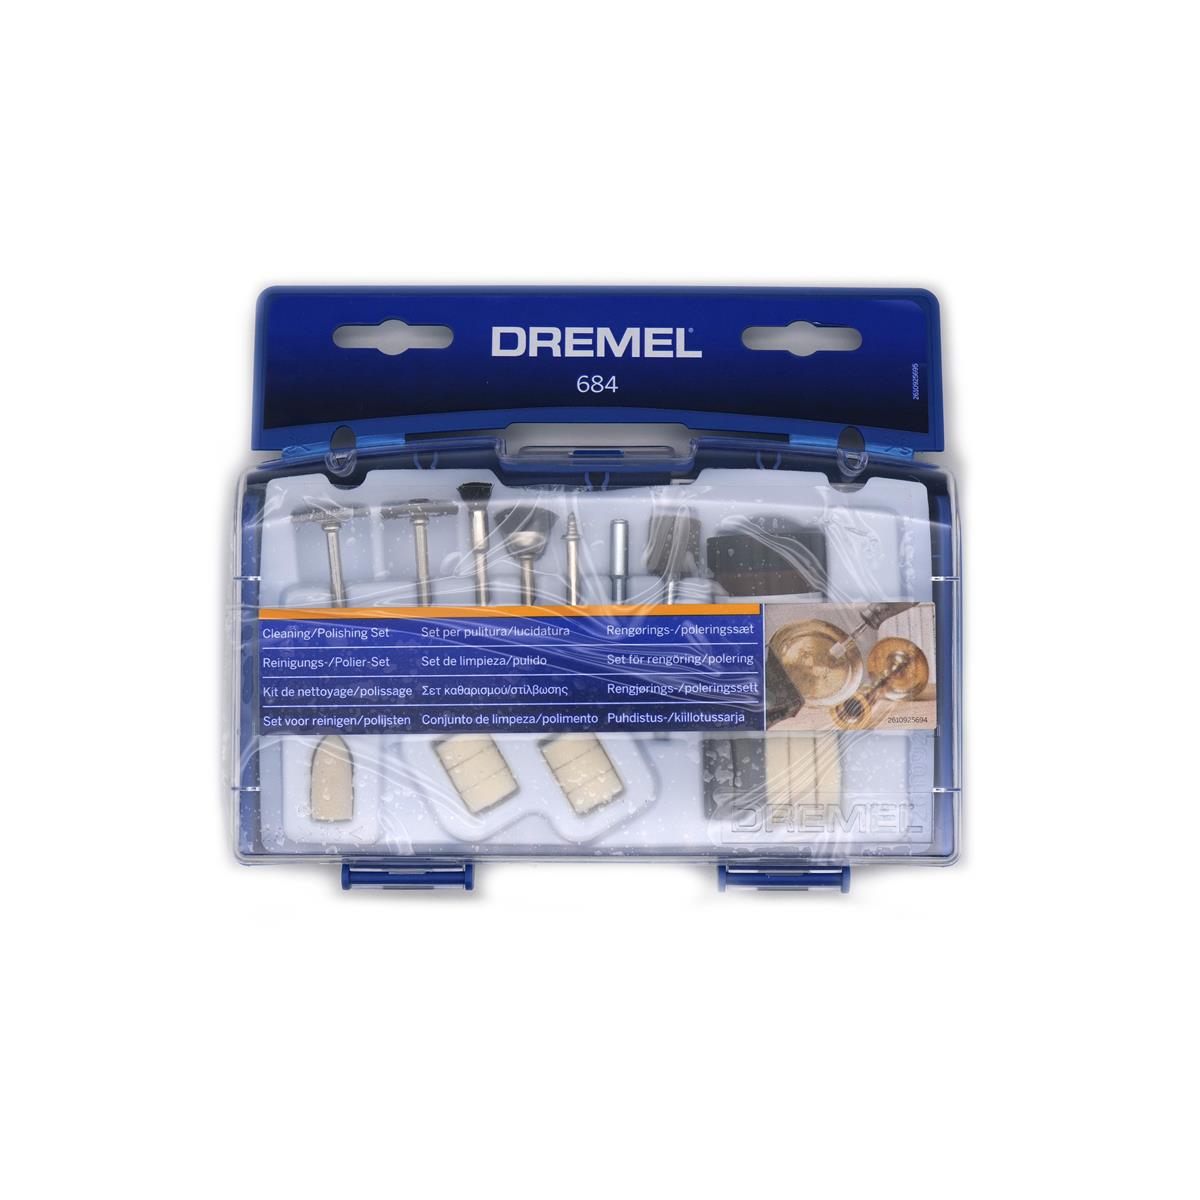 Dremel 684 Cleaning and Polishing Kit, Accessory Set with 20 Accessories  for Rotary Multi Tools